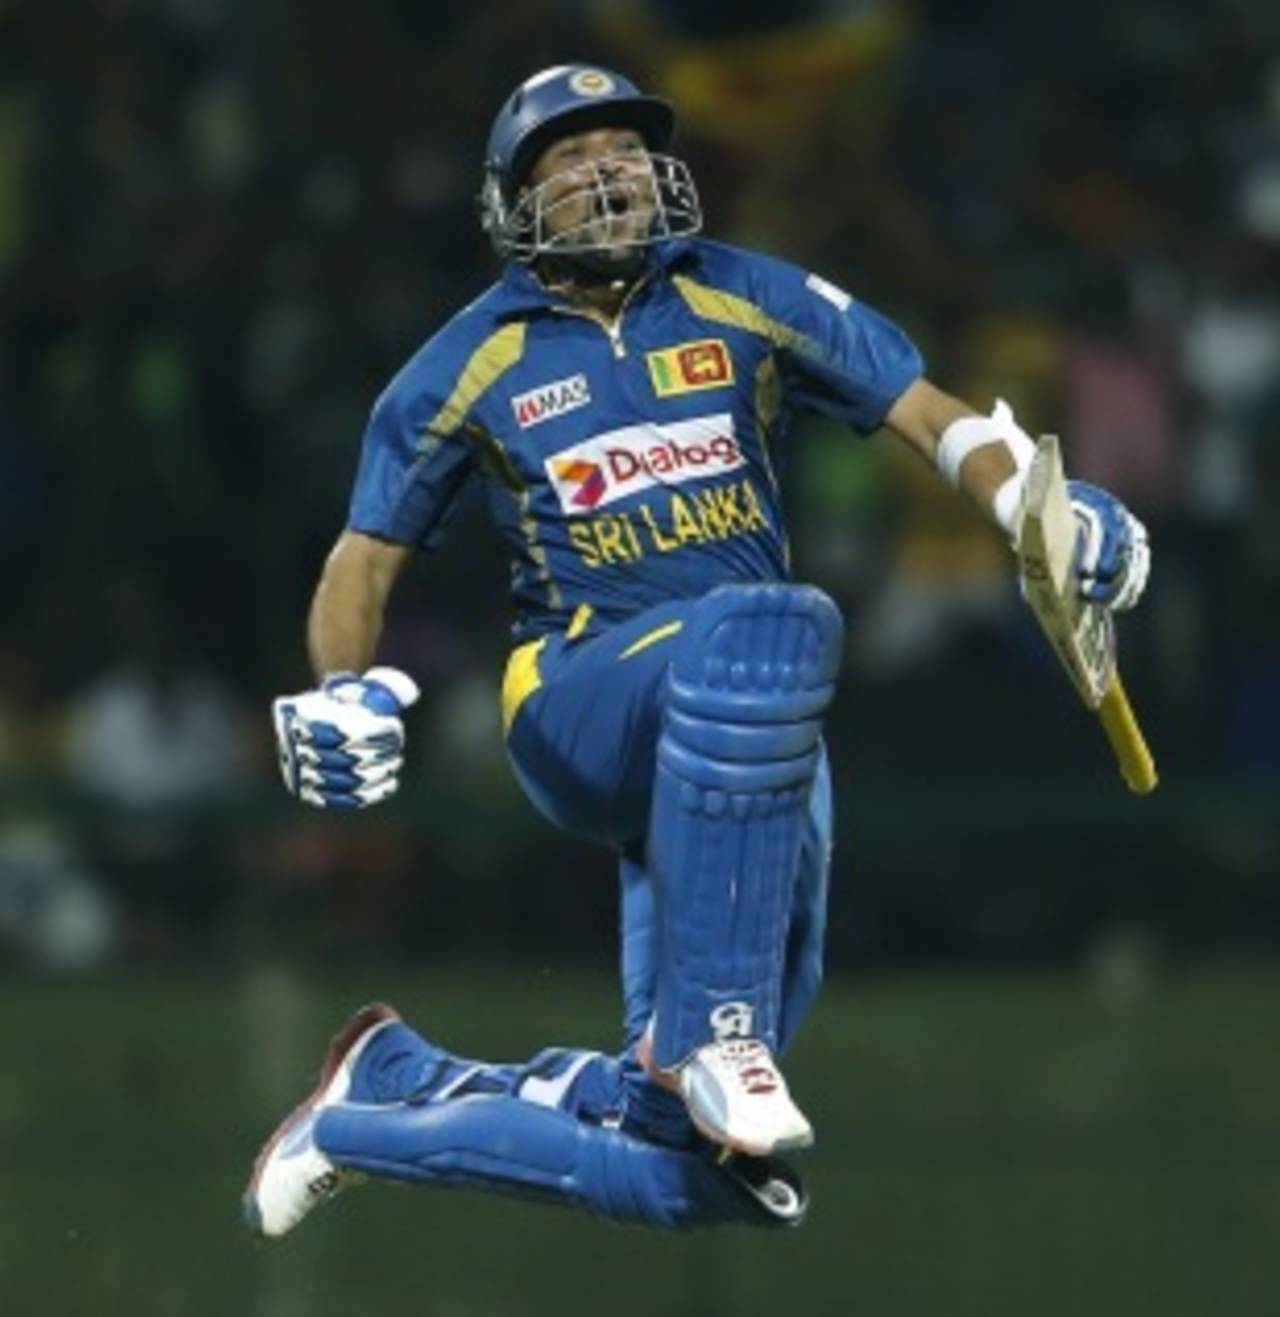 There is unbridled joy in each of Dilshan's hundred celebrations, but this one was tinged with some relief too&nbsp;&nbsp;&bull;&nbsp;&nbsp;Associated Press